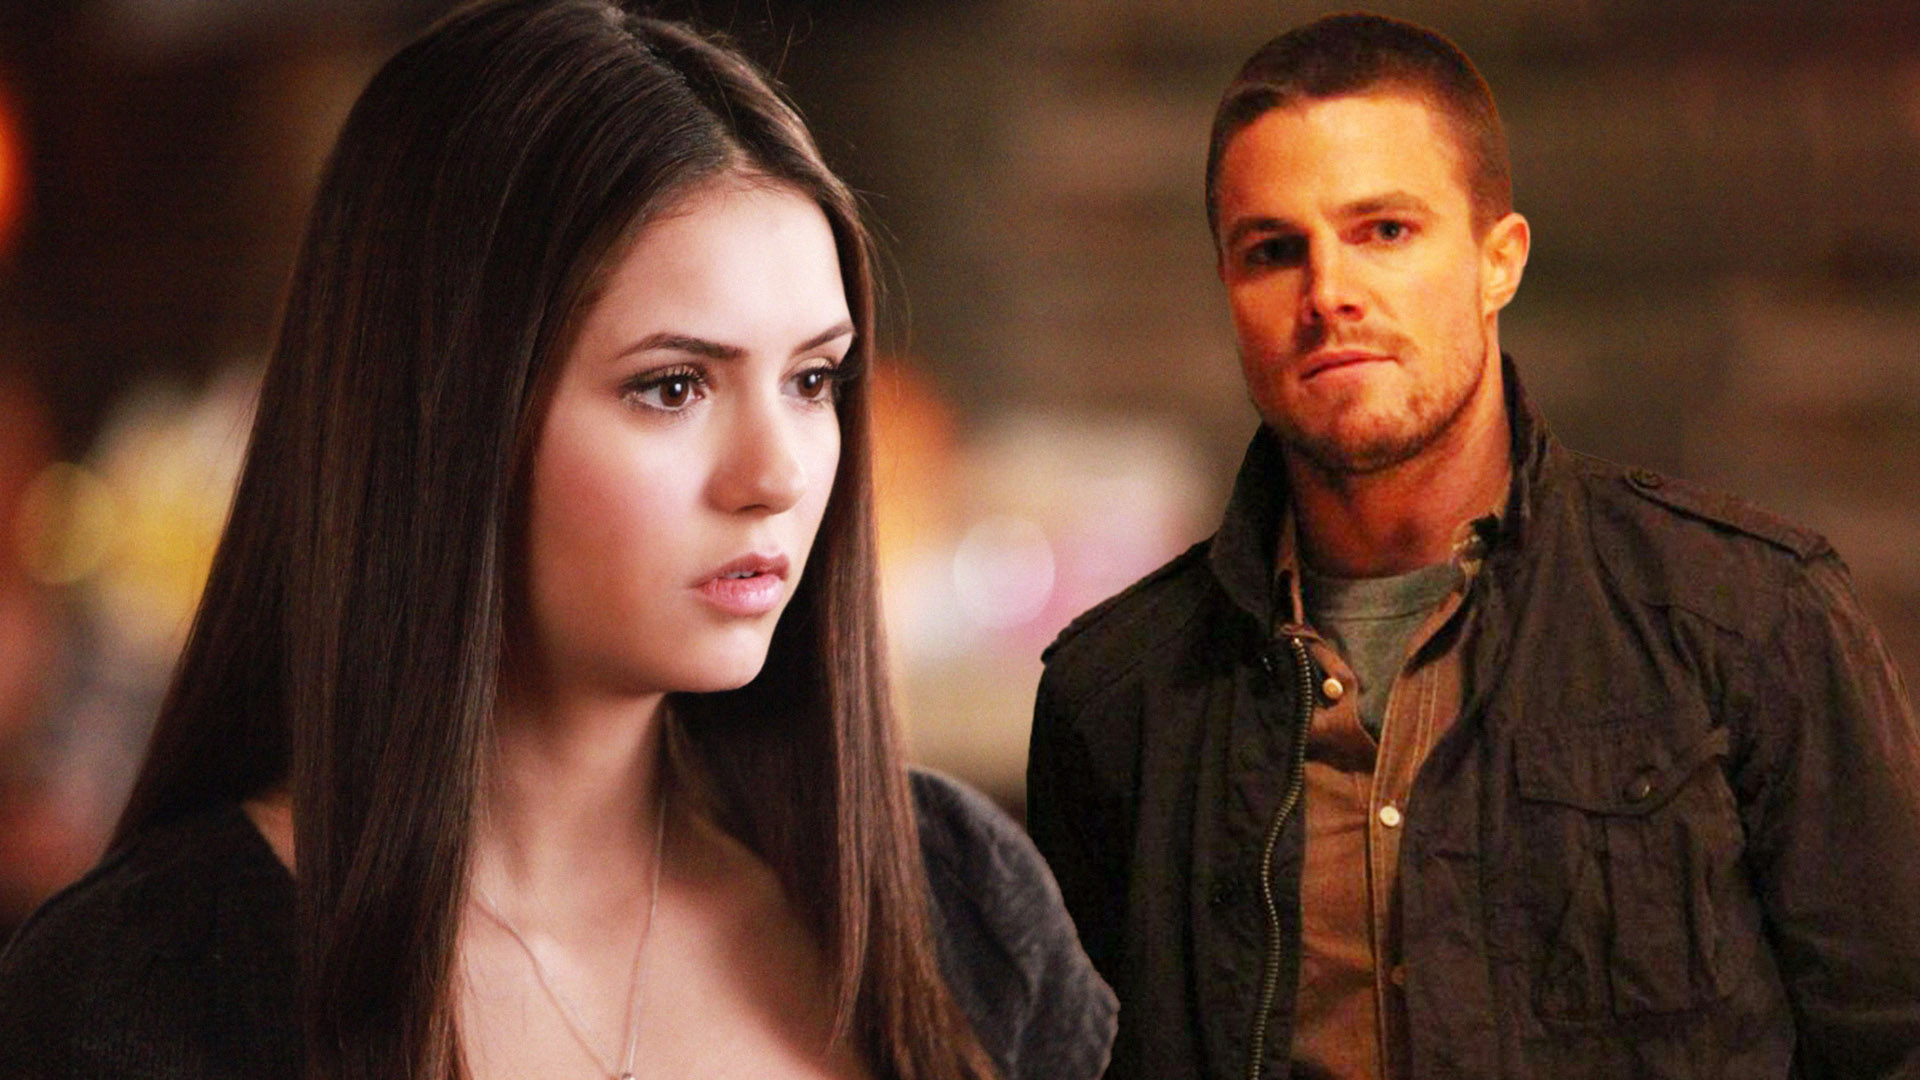 5 Actors You Totally Forgot Were on The Vampire Diaries